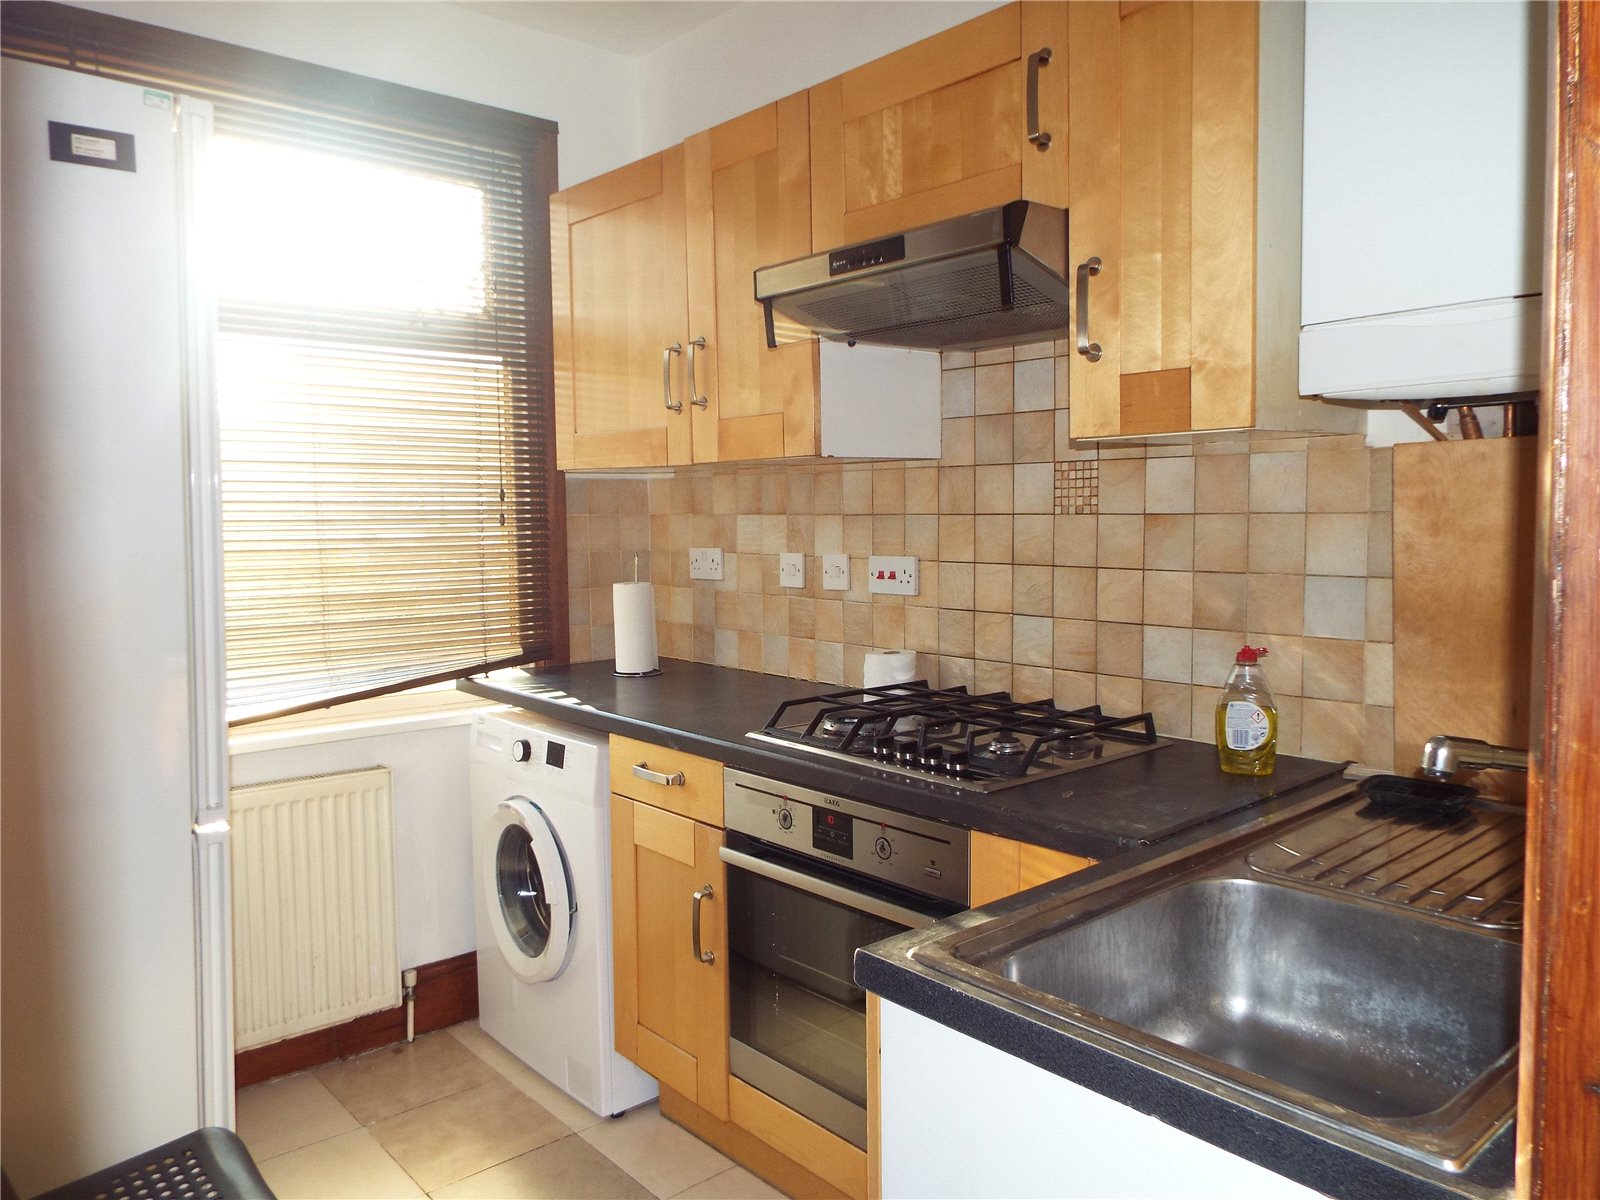 3 bed apartment to rent in Southbury Road, Enfield, EN1 